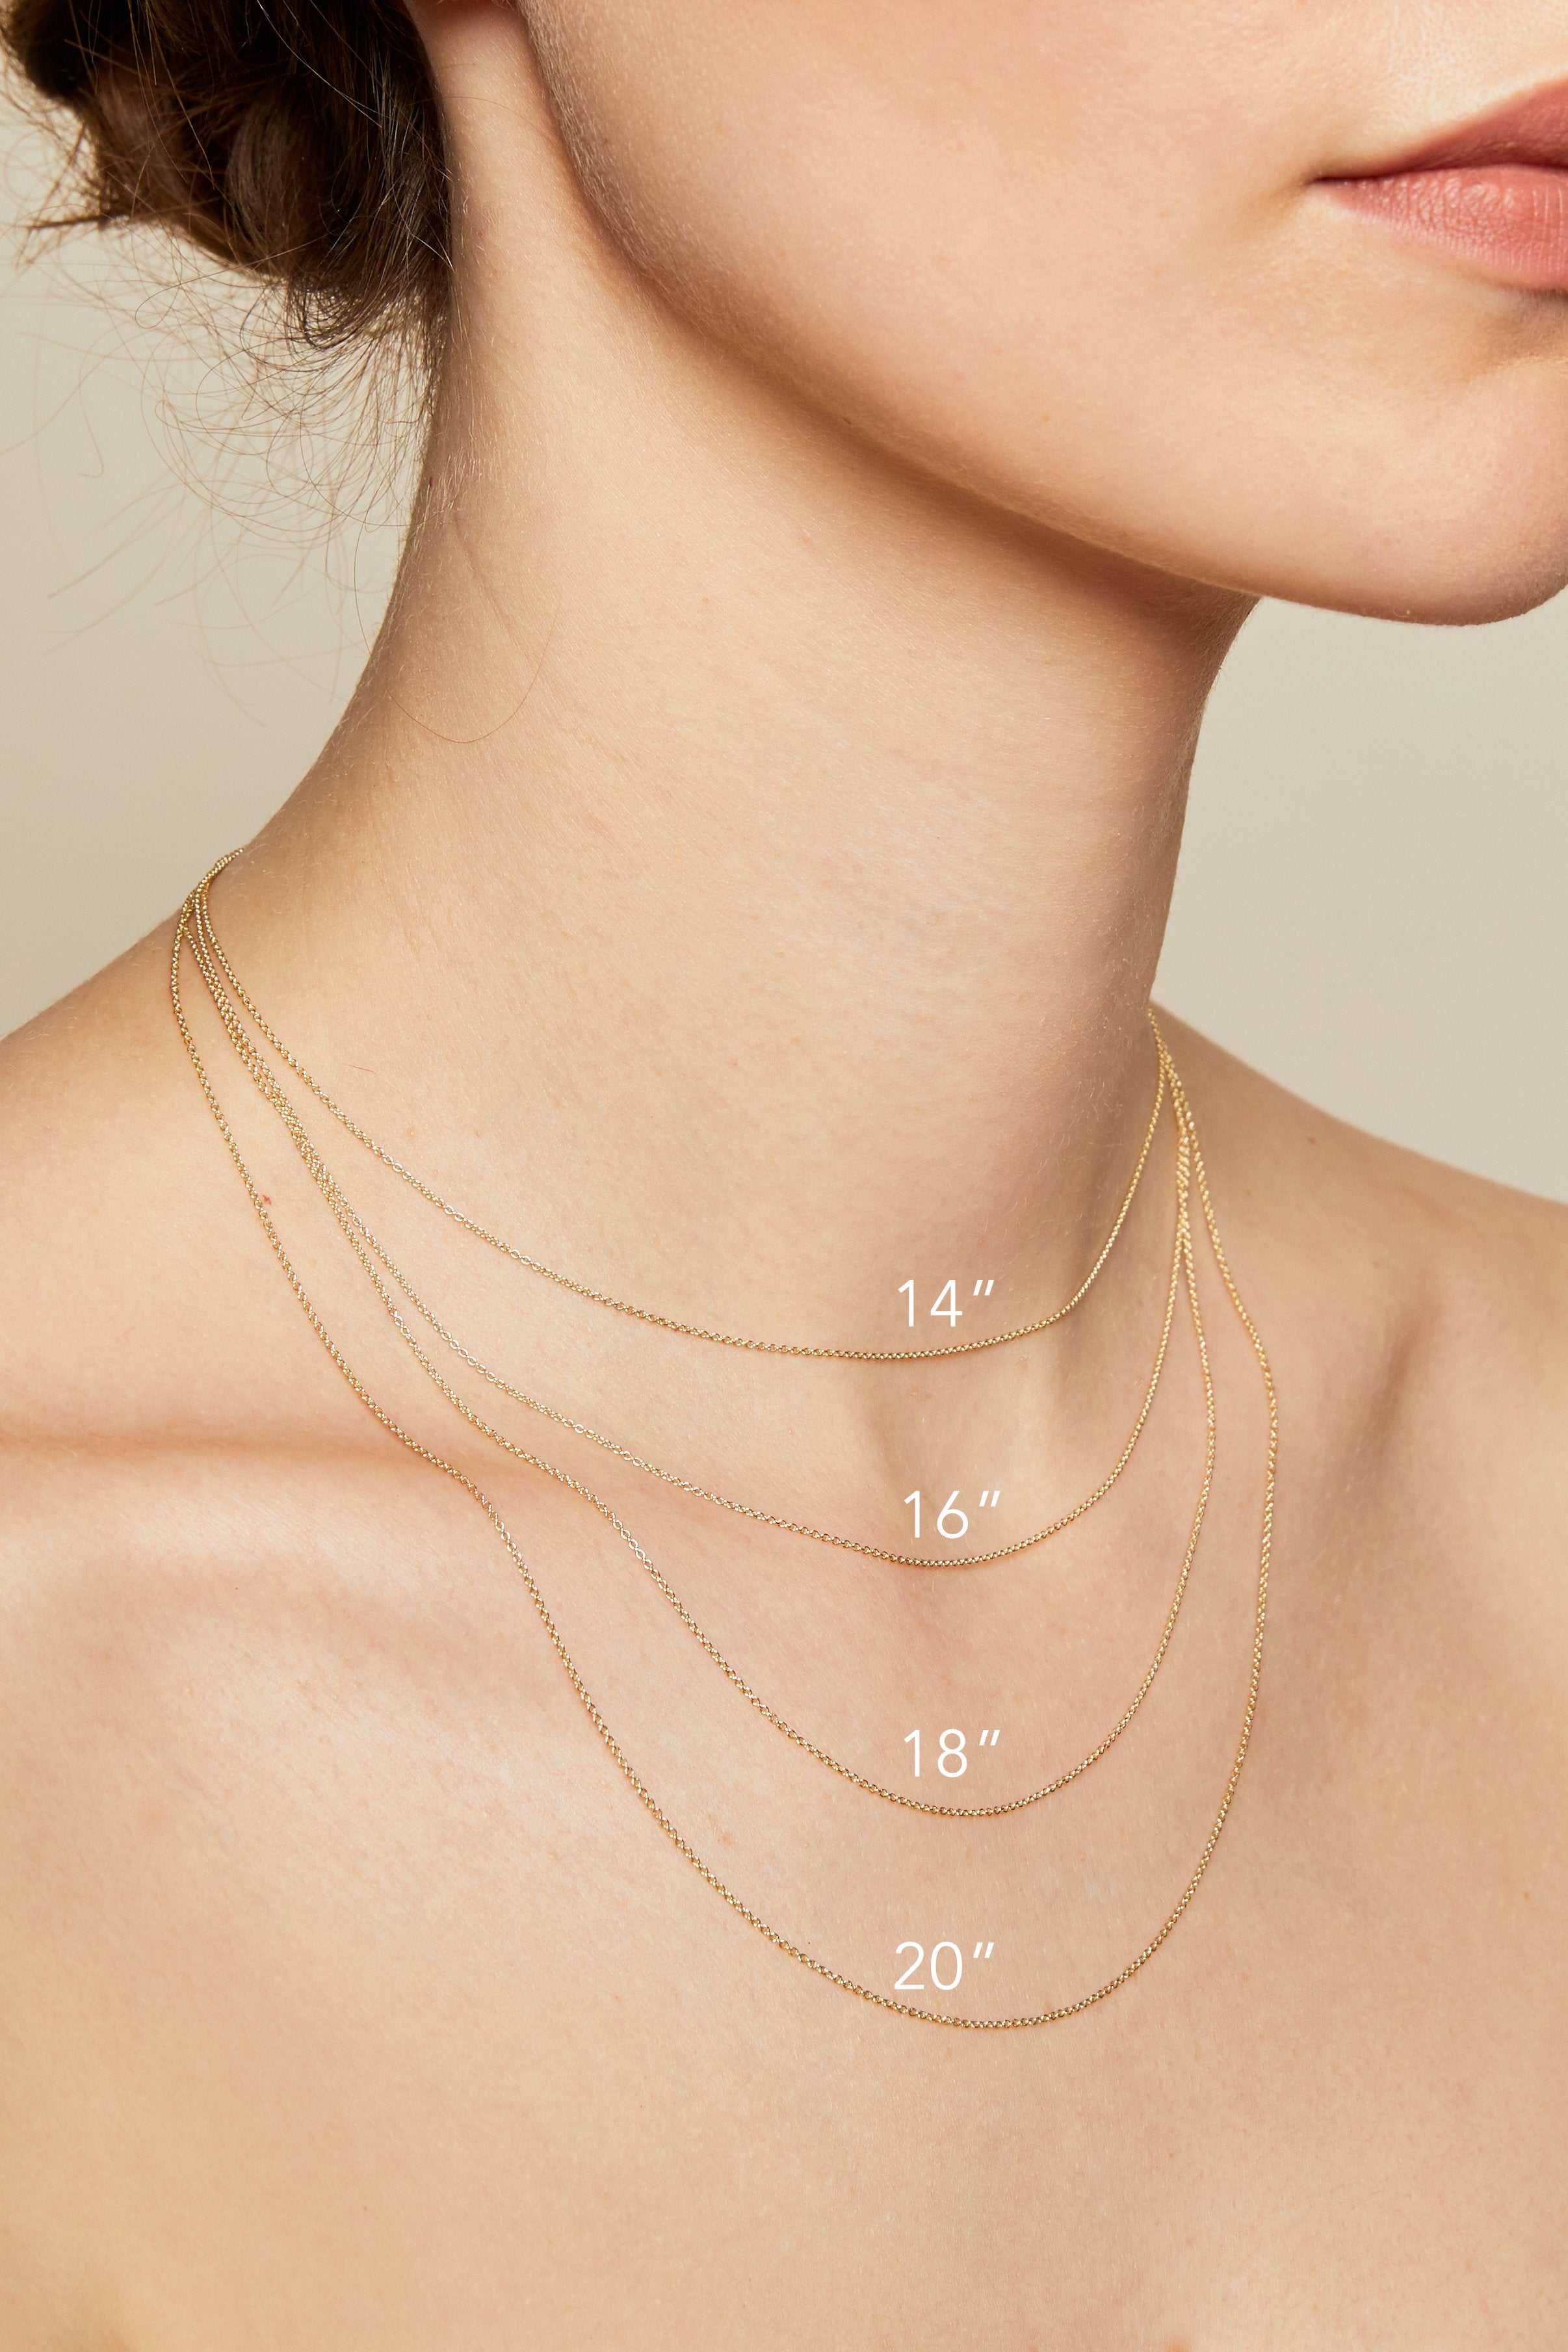 Say My Name - Initial Jewelry With Meira T And Deutsch Fine Jewelry